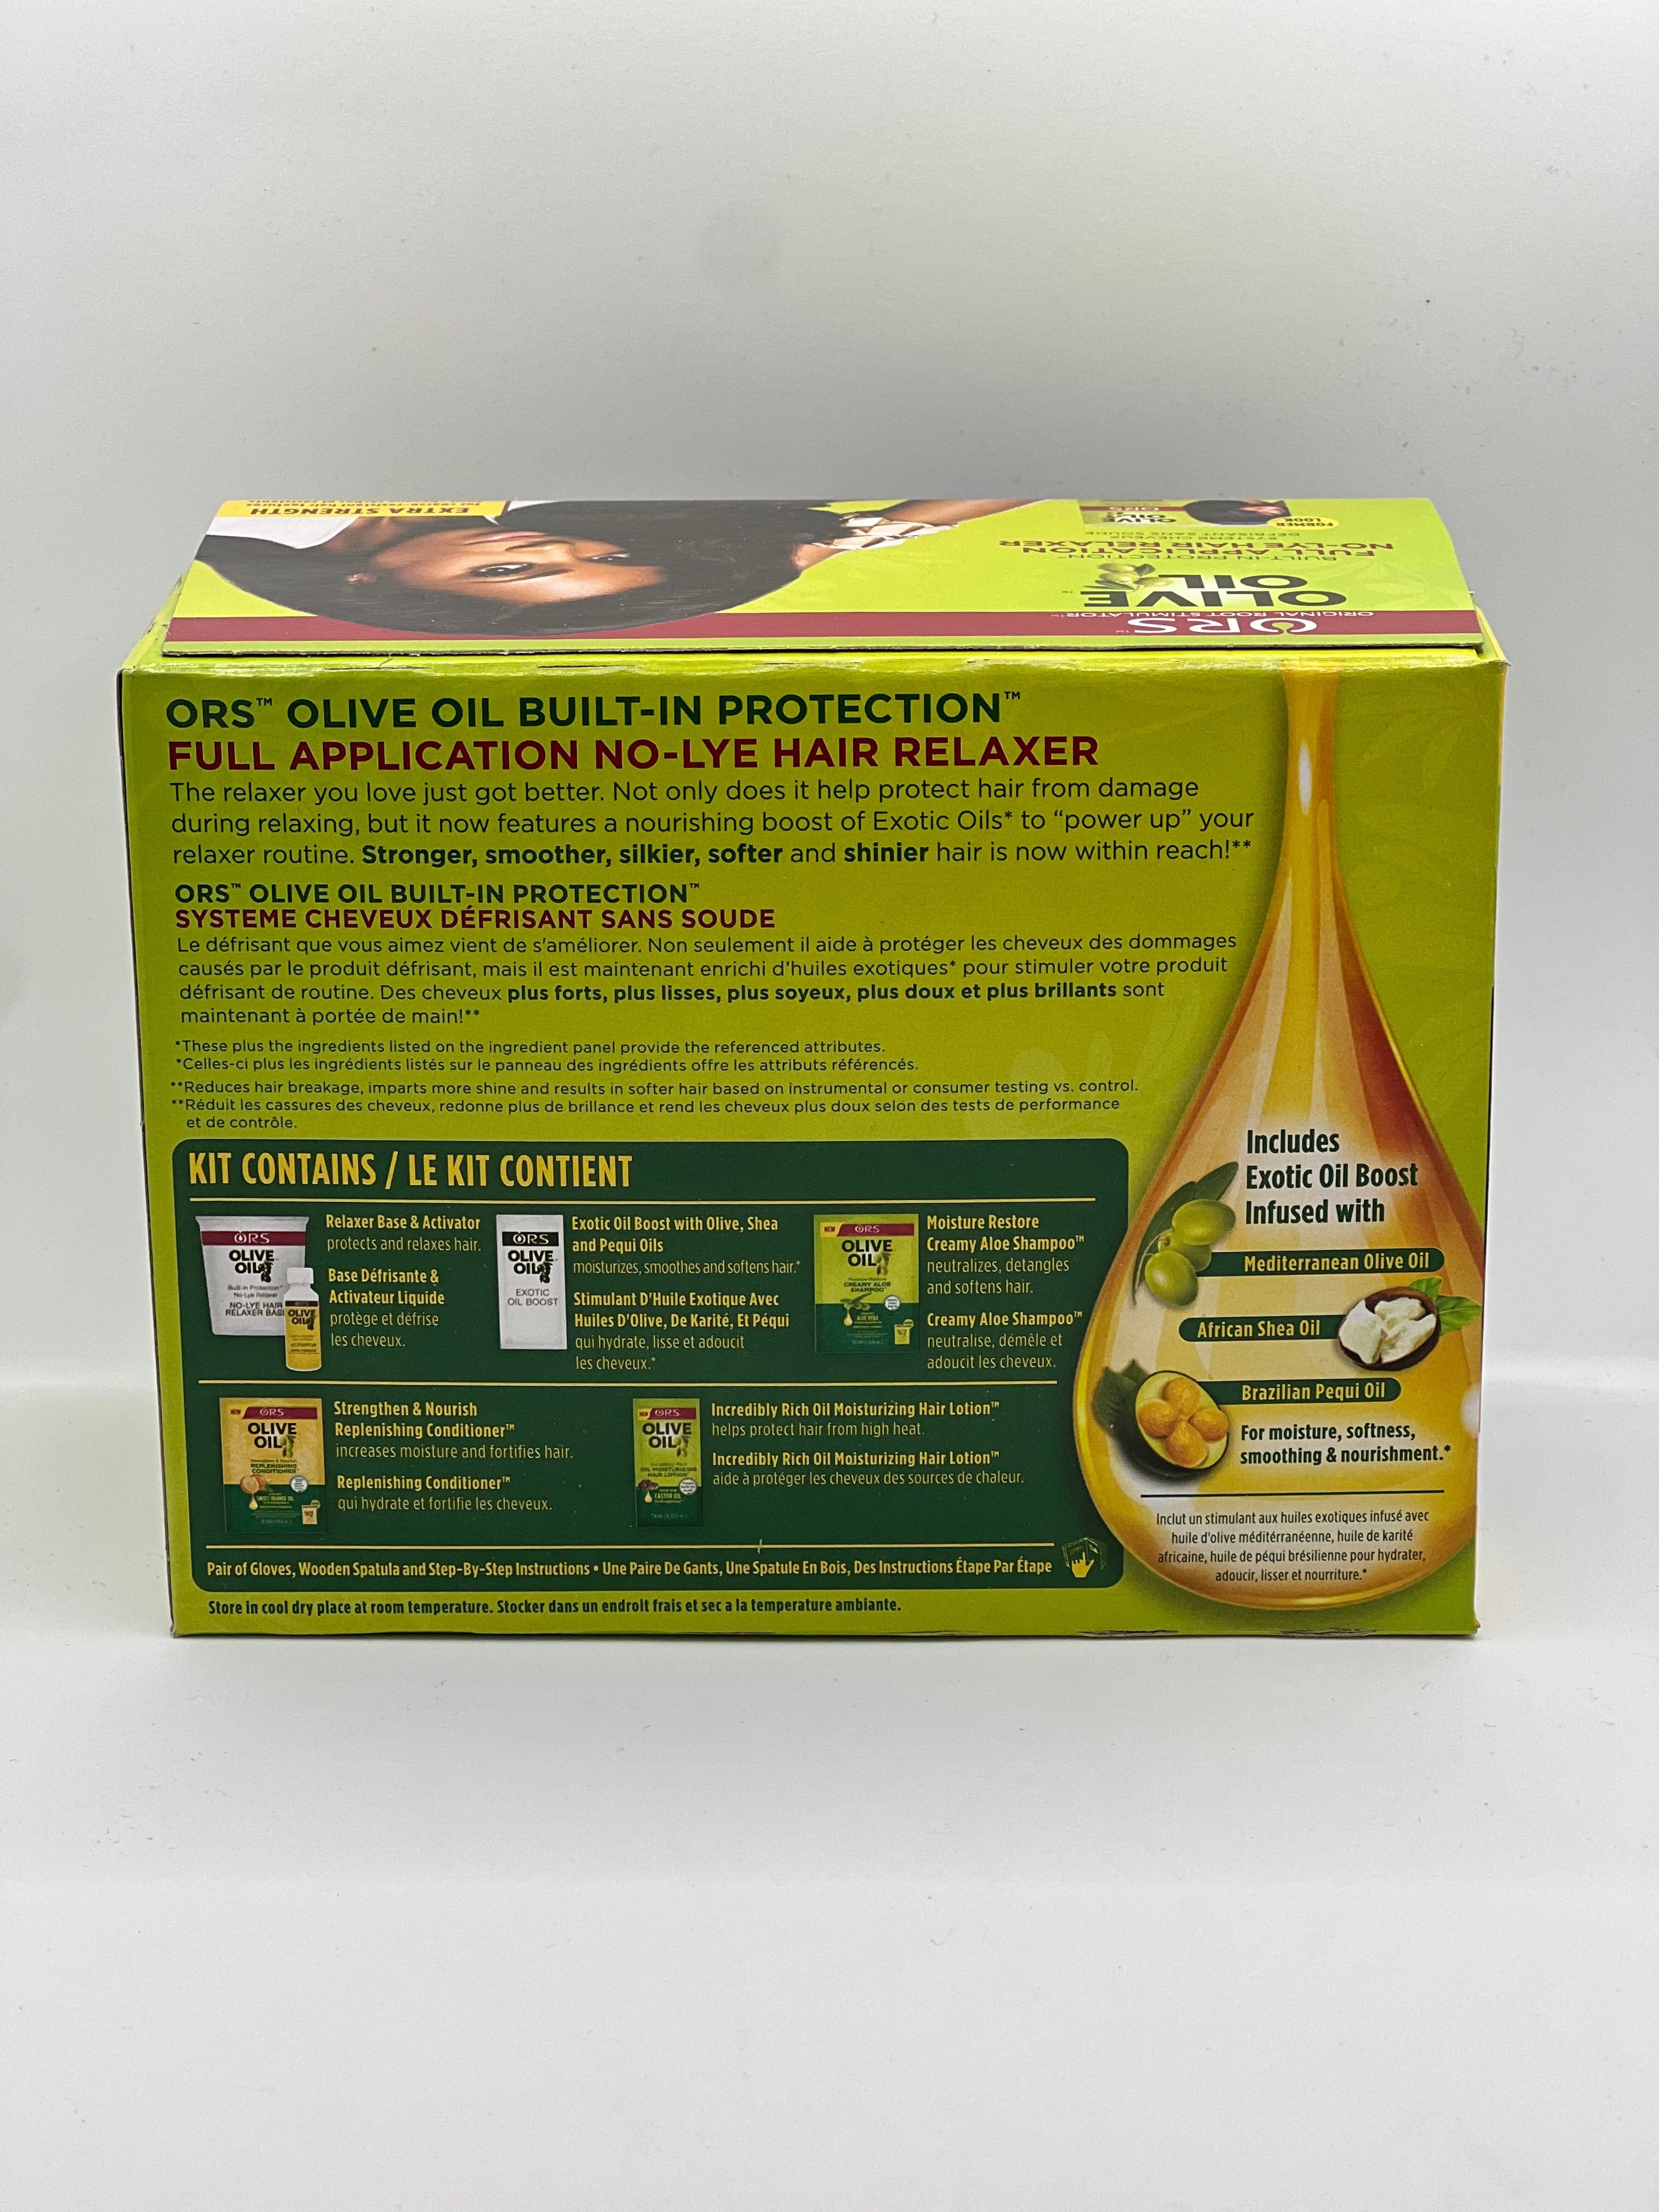 ORS Olive Oil Extra Strength No-Lye Relaxer